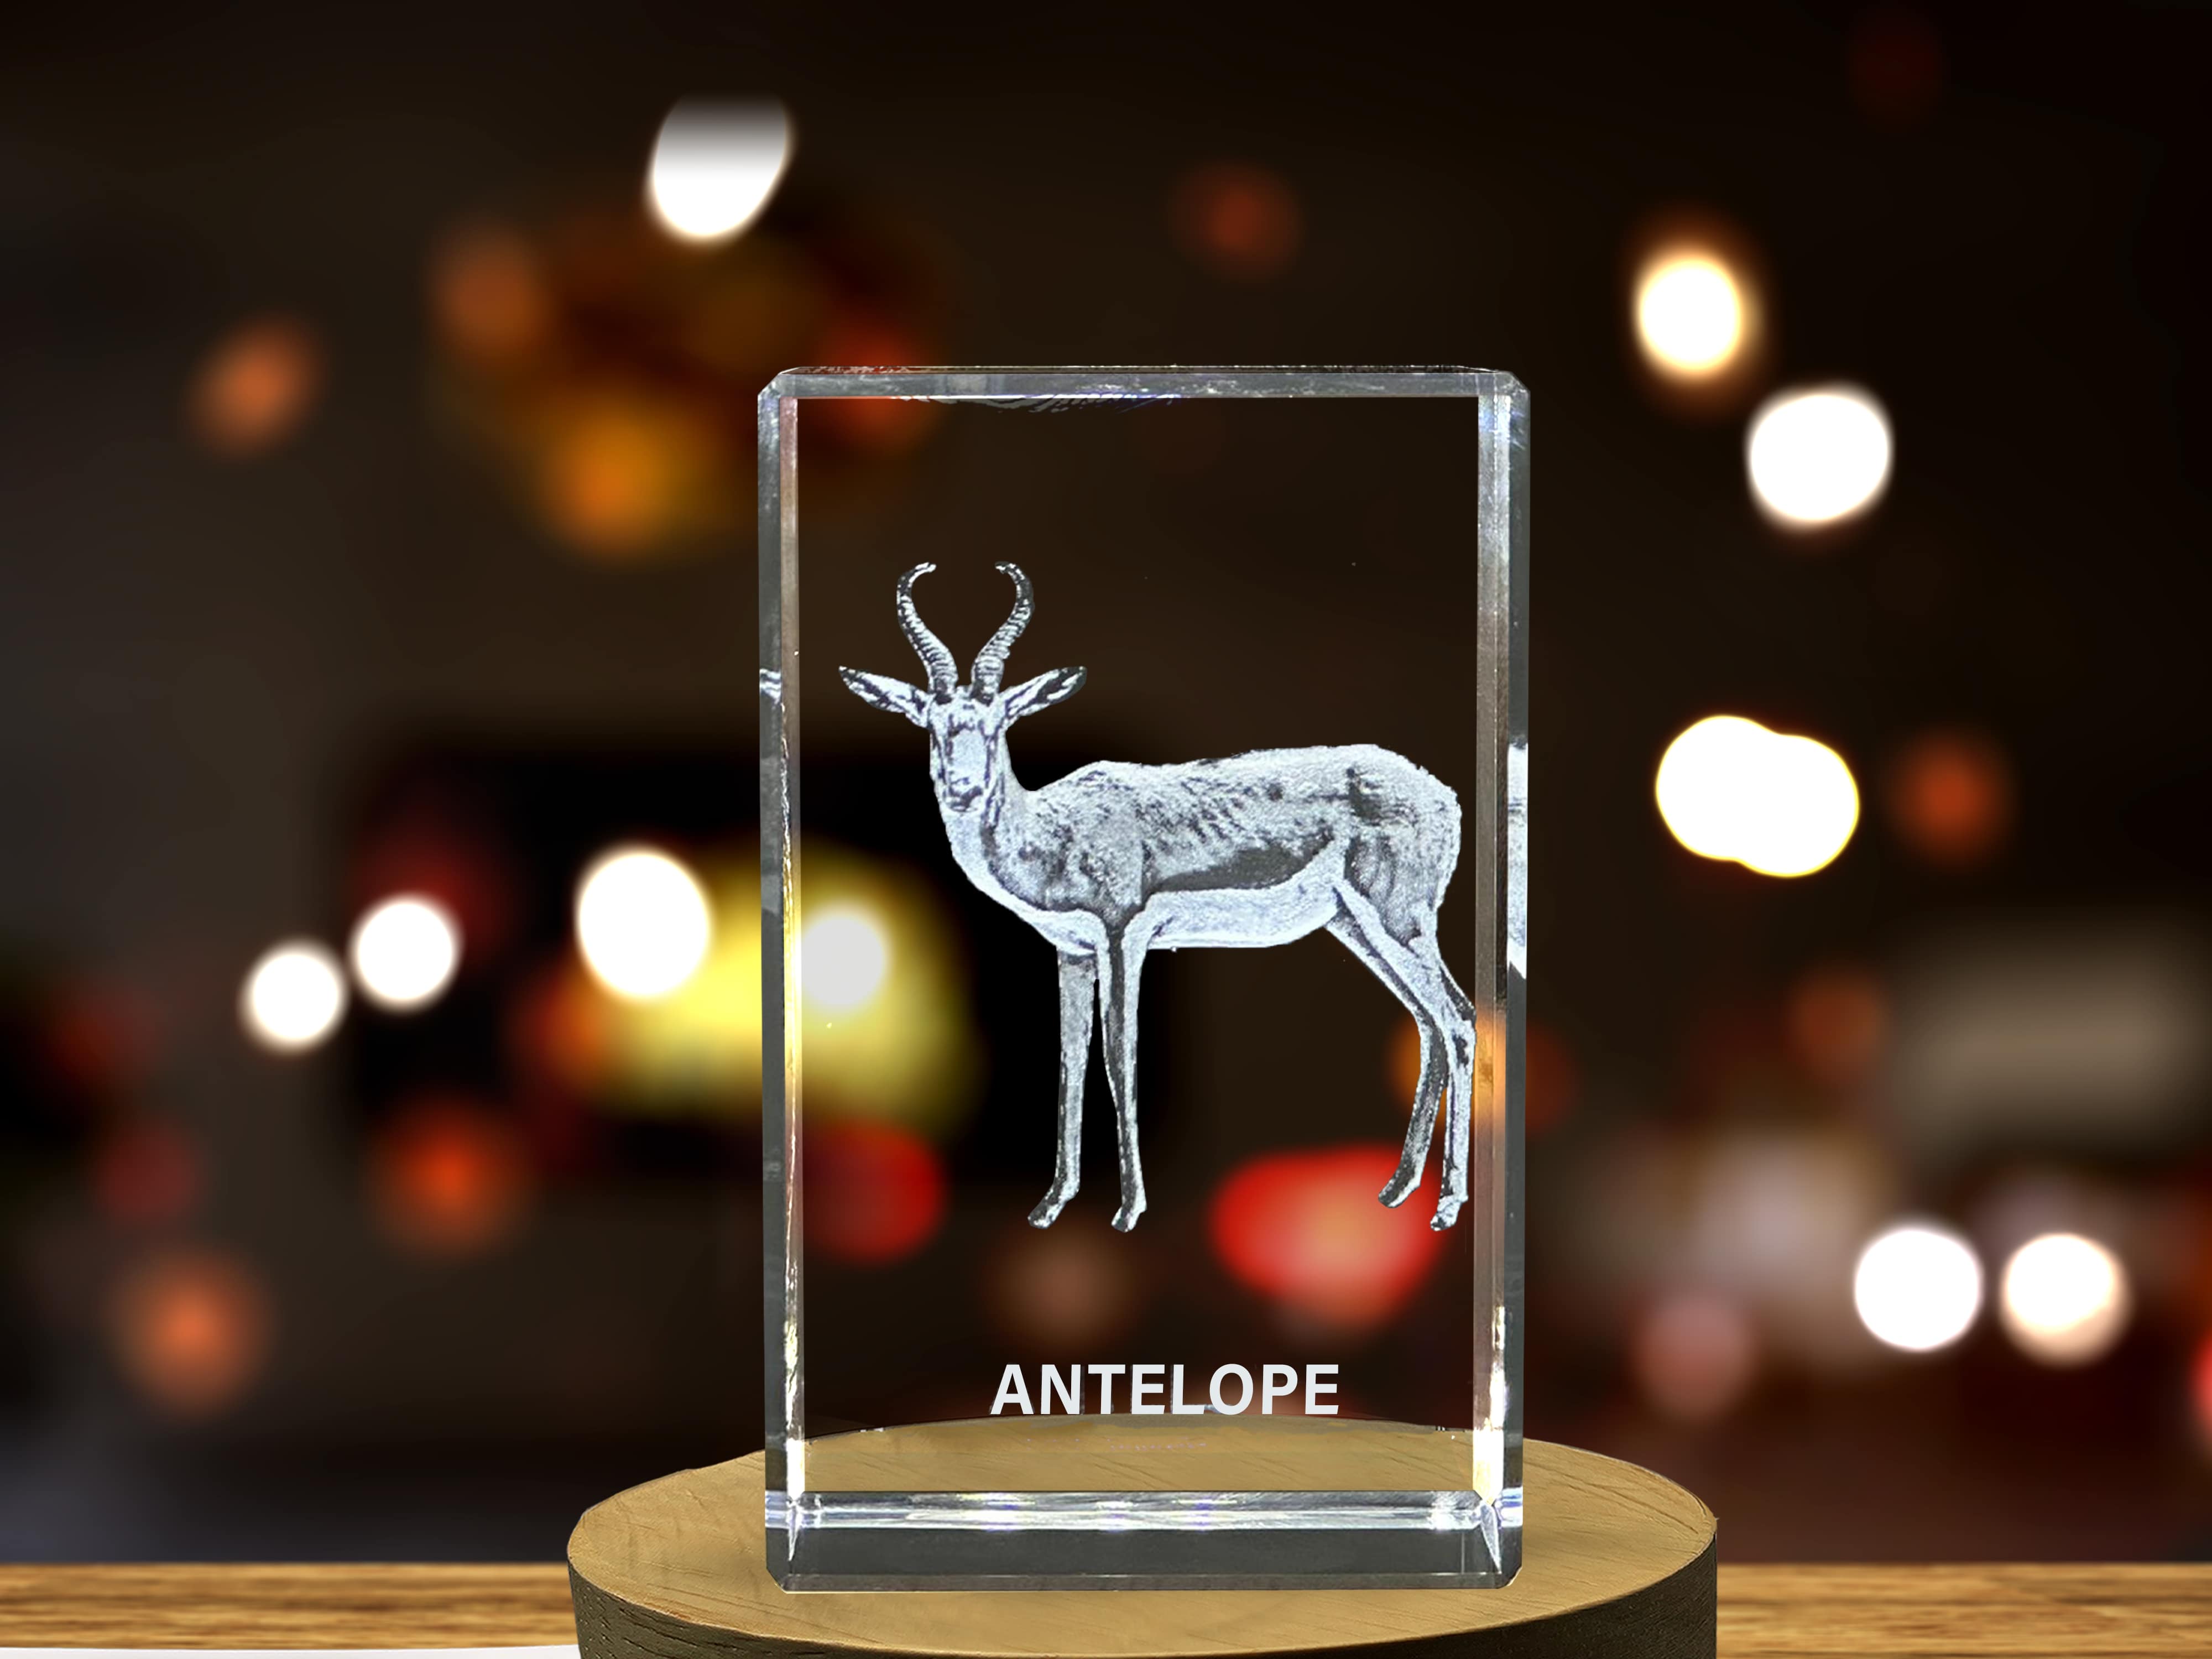 Unique 3D Engraved Crystal with Antelope Design - Perfect Gift for Animal Lovers A&B Crystal Collection